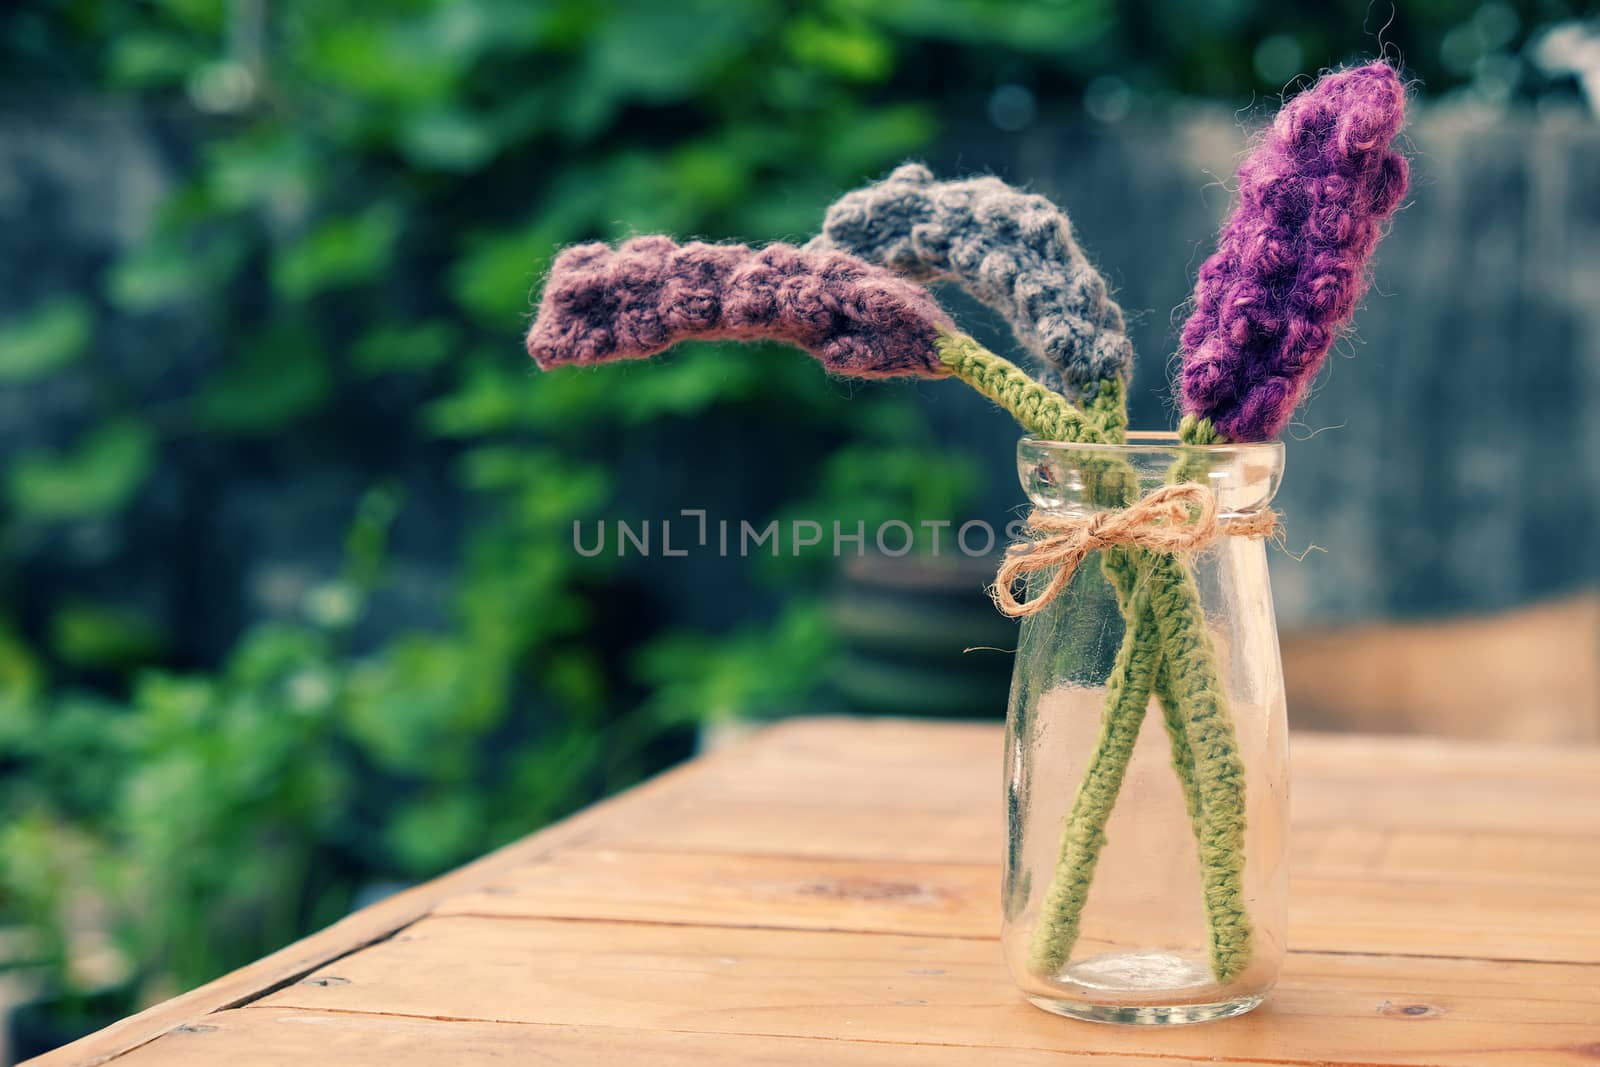 Beautiful knitted lavender flower for home decoration, homemade product knit from yarn, set on table in garden